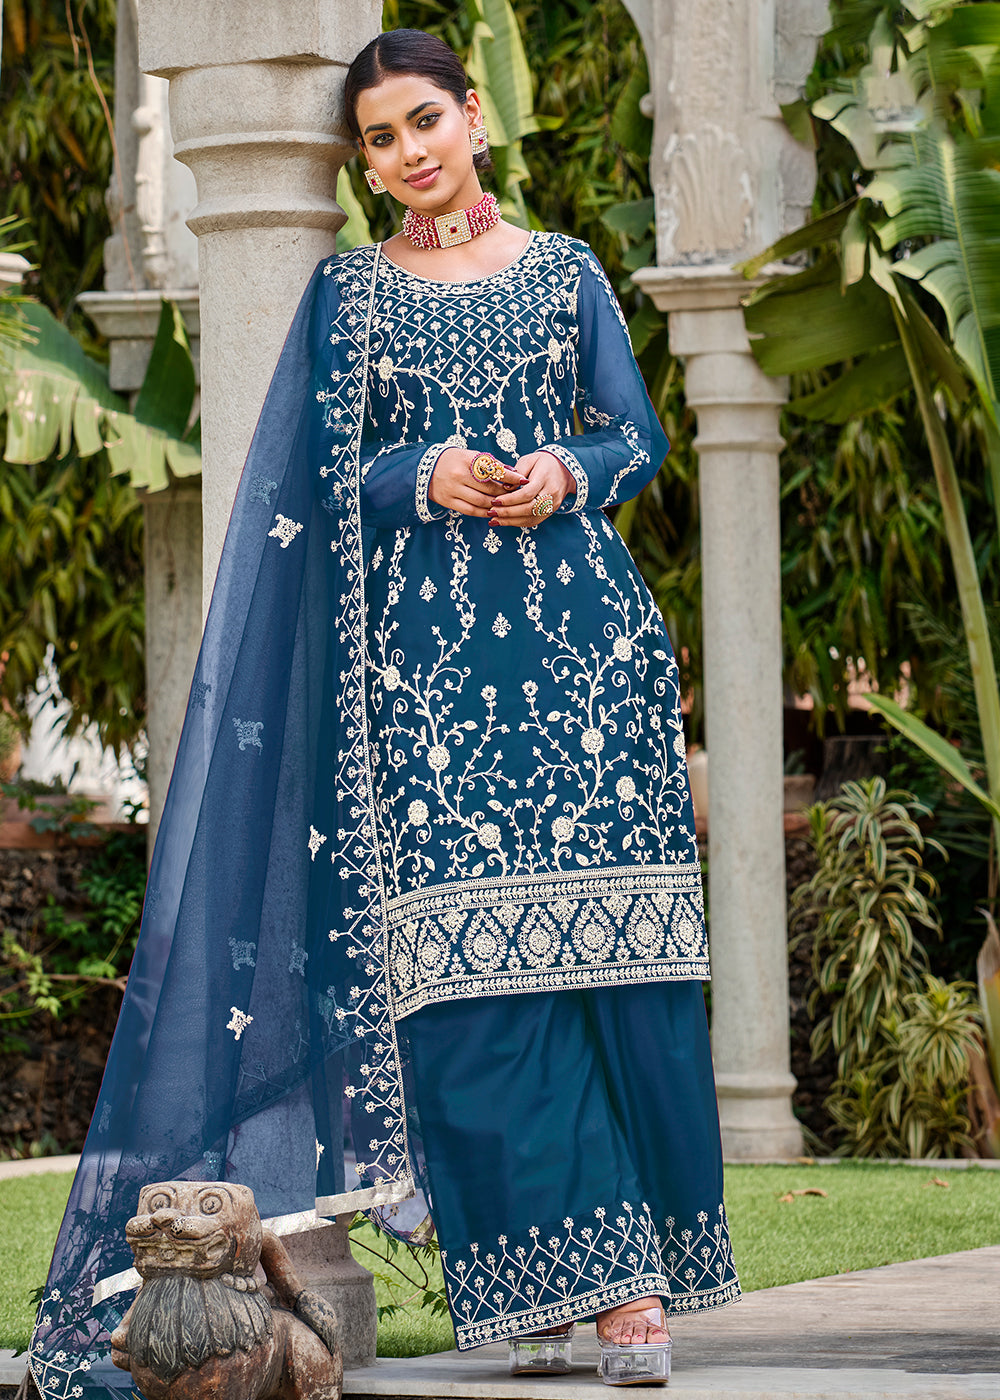 Buy Now Prussian Blue Stone & Cording Work Festive Palazzo Suit Online in USA, UK, Canada, Germany, Australia & Worldwide at Empress Clothing.